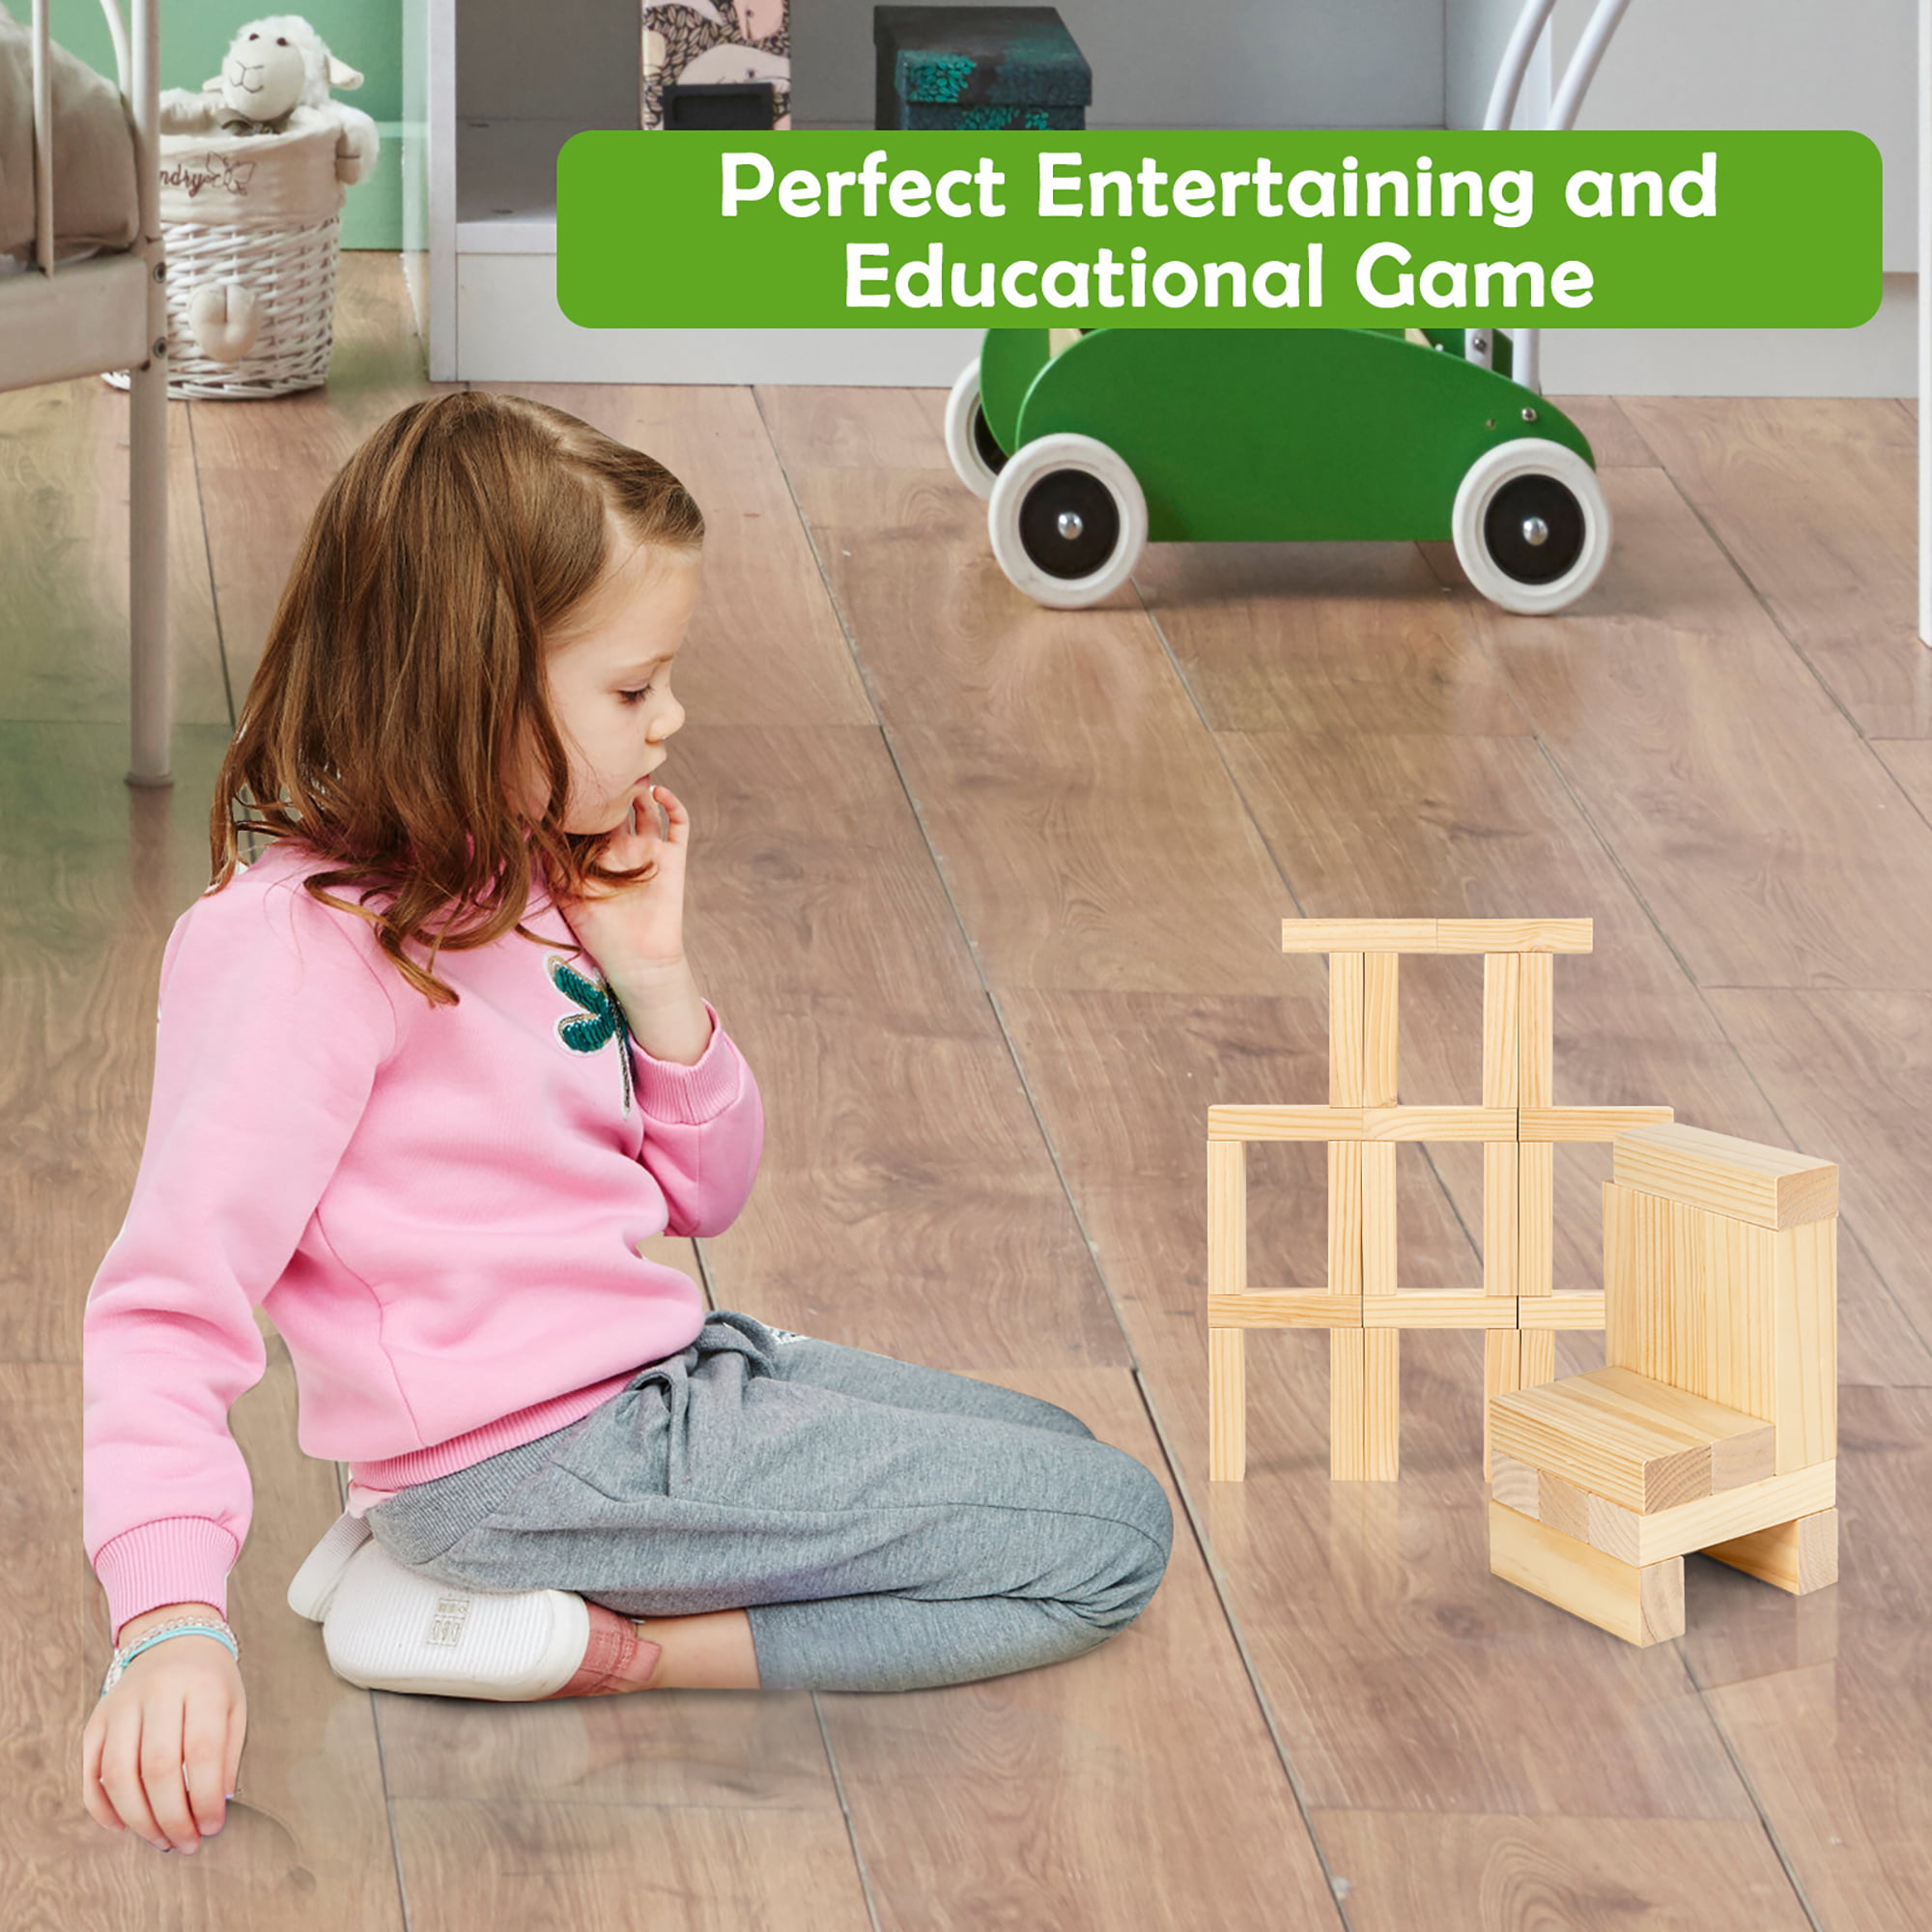 Hey! Play! Giant Wood Block Stacking Game Jumbo Pine Wood Blocks Outdoor  Backyard Entertainment for the Family and Kids (54-Piece) 301572CGU - The  Home Depot